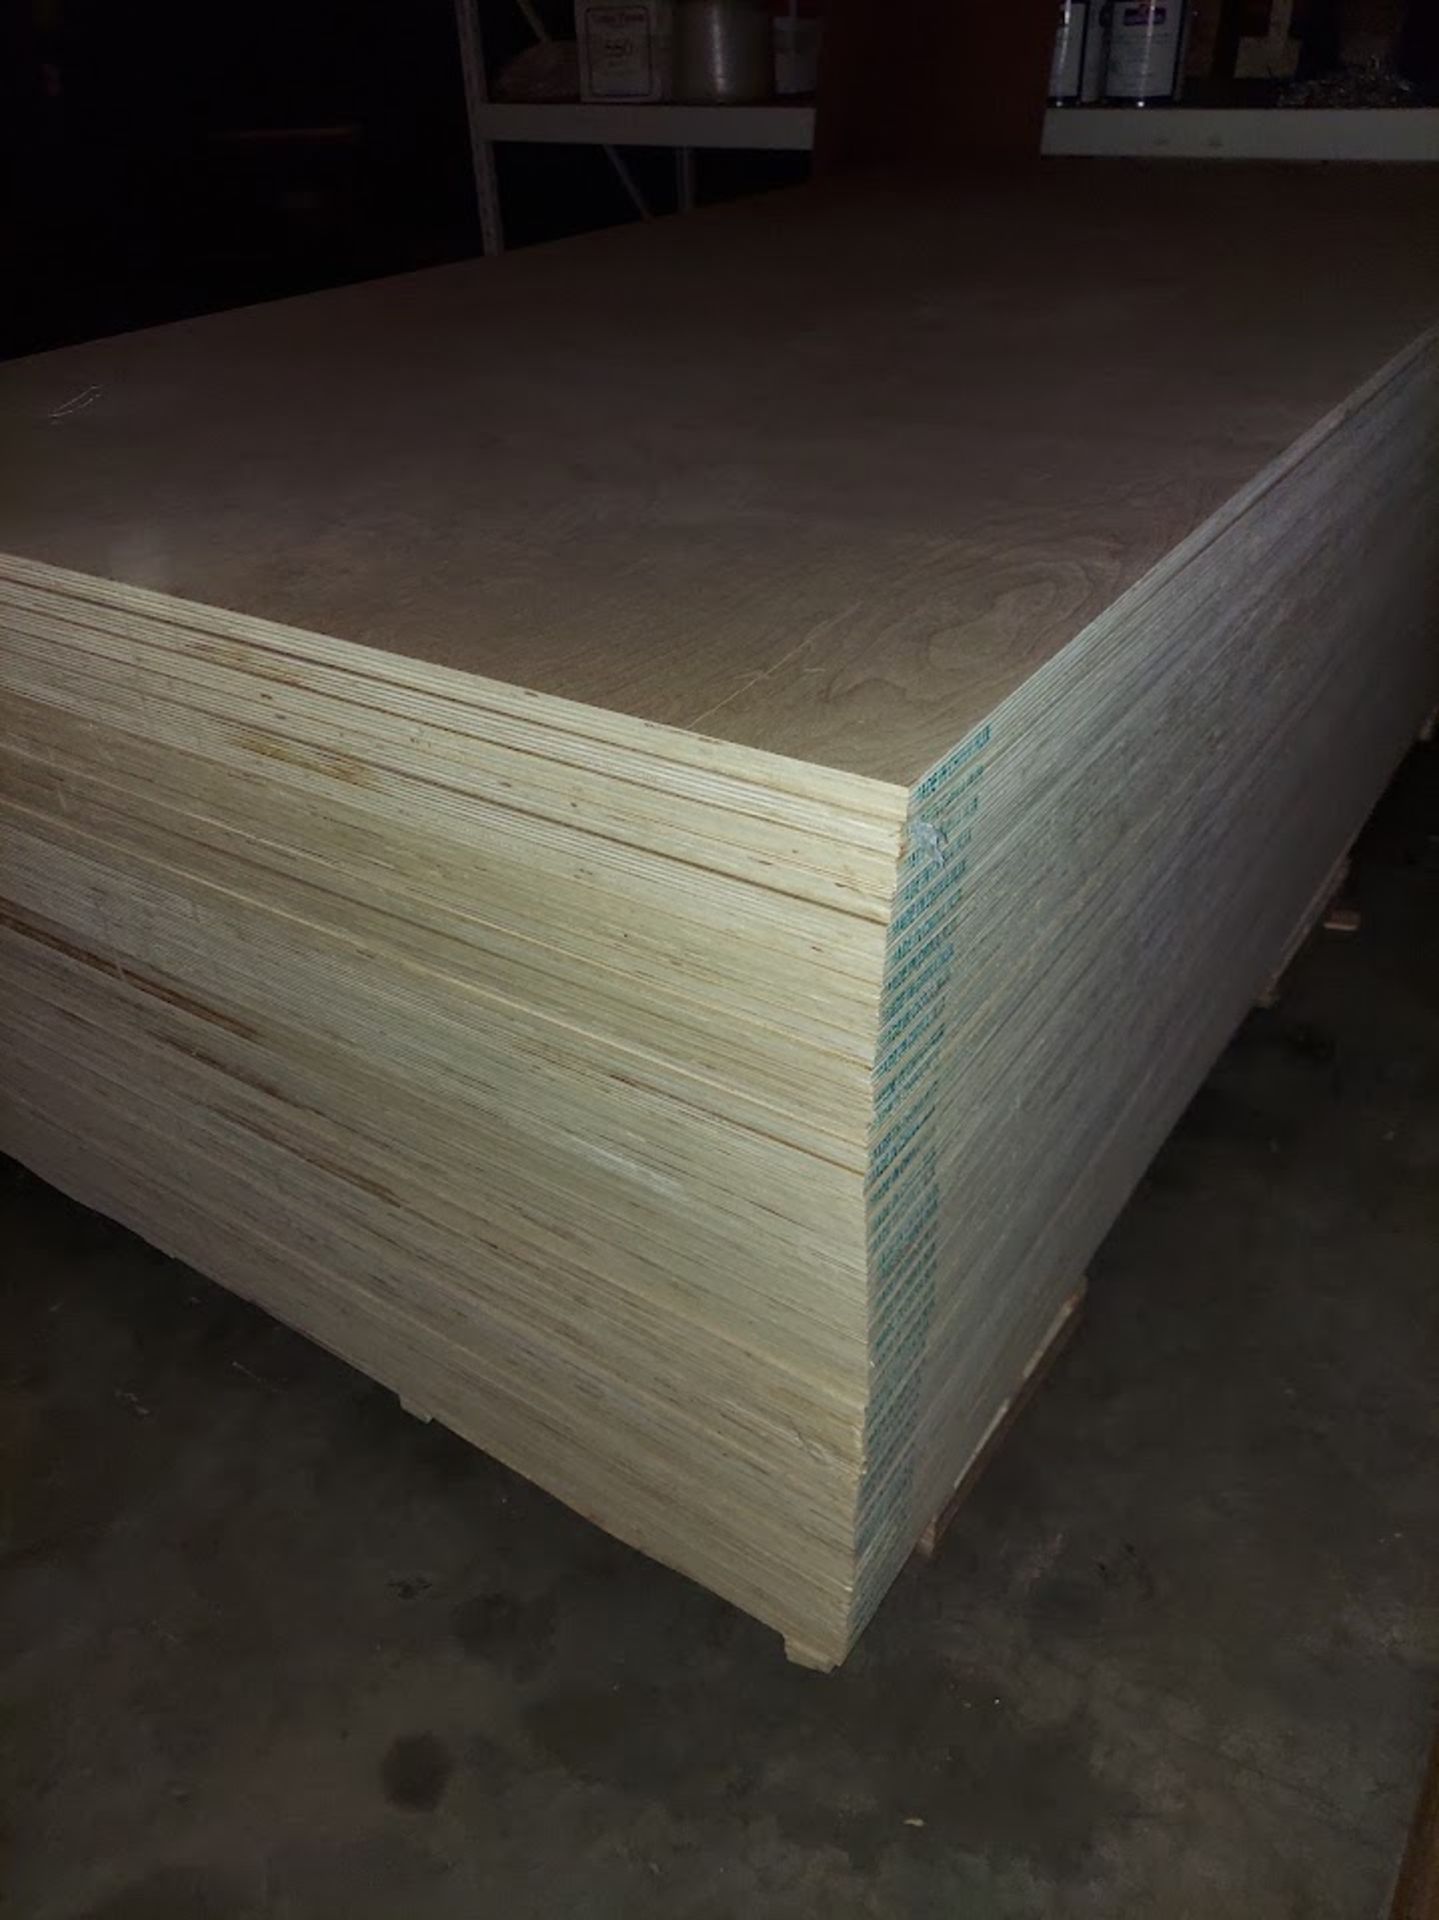 34 Sheets of 18mm Red Birch Plywood 4' x 8' Sheets - Image 3 of 3